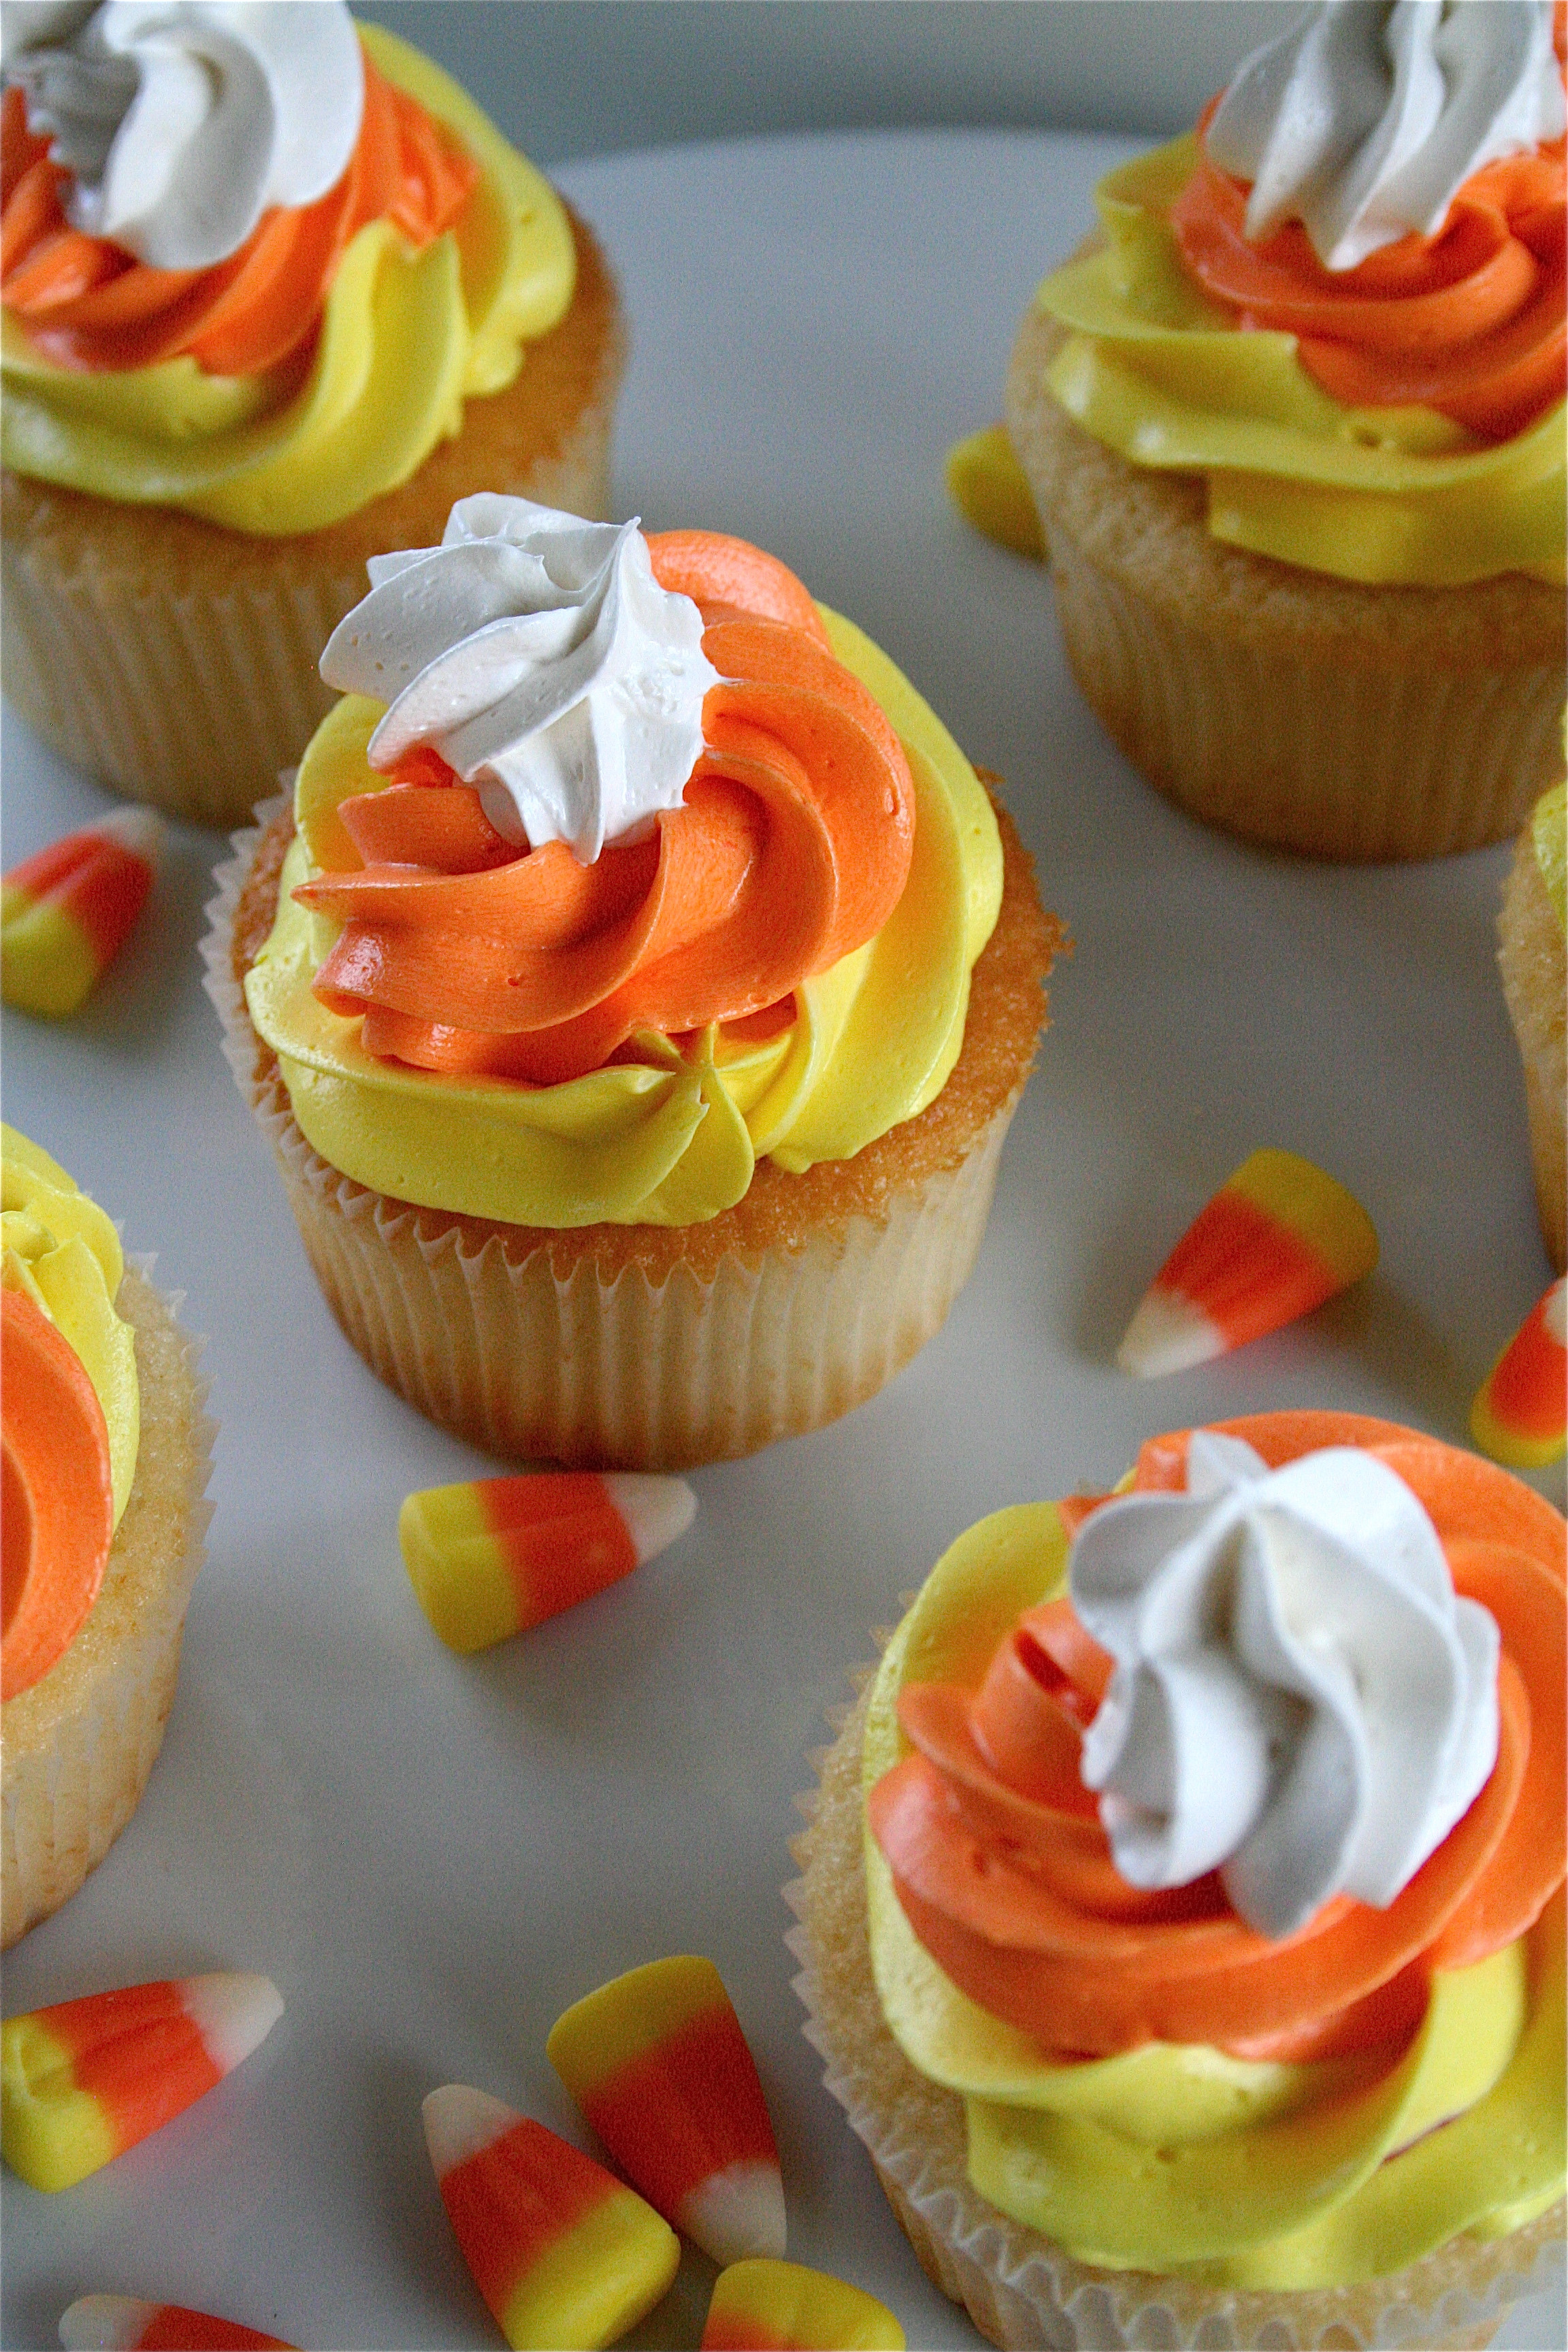 Picture Of Halloween Cupcakes
 28 Cute Halloween Cupcakes Easy Recipes for Halloween